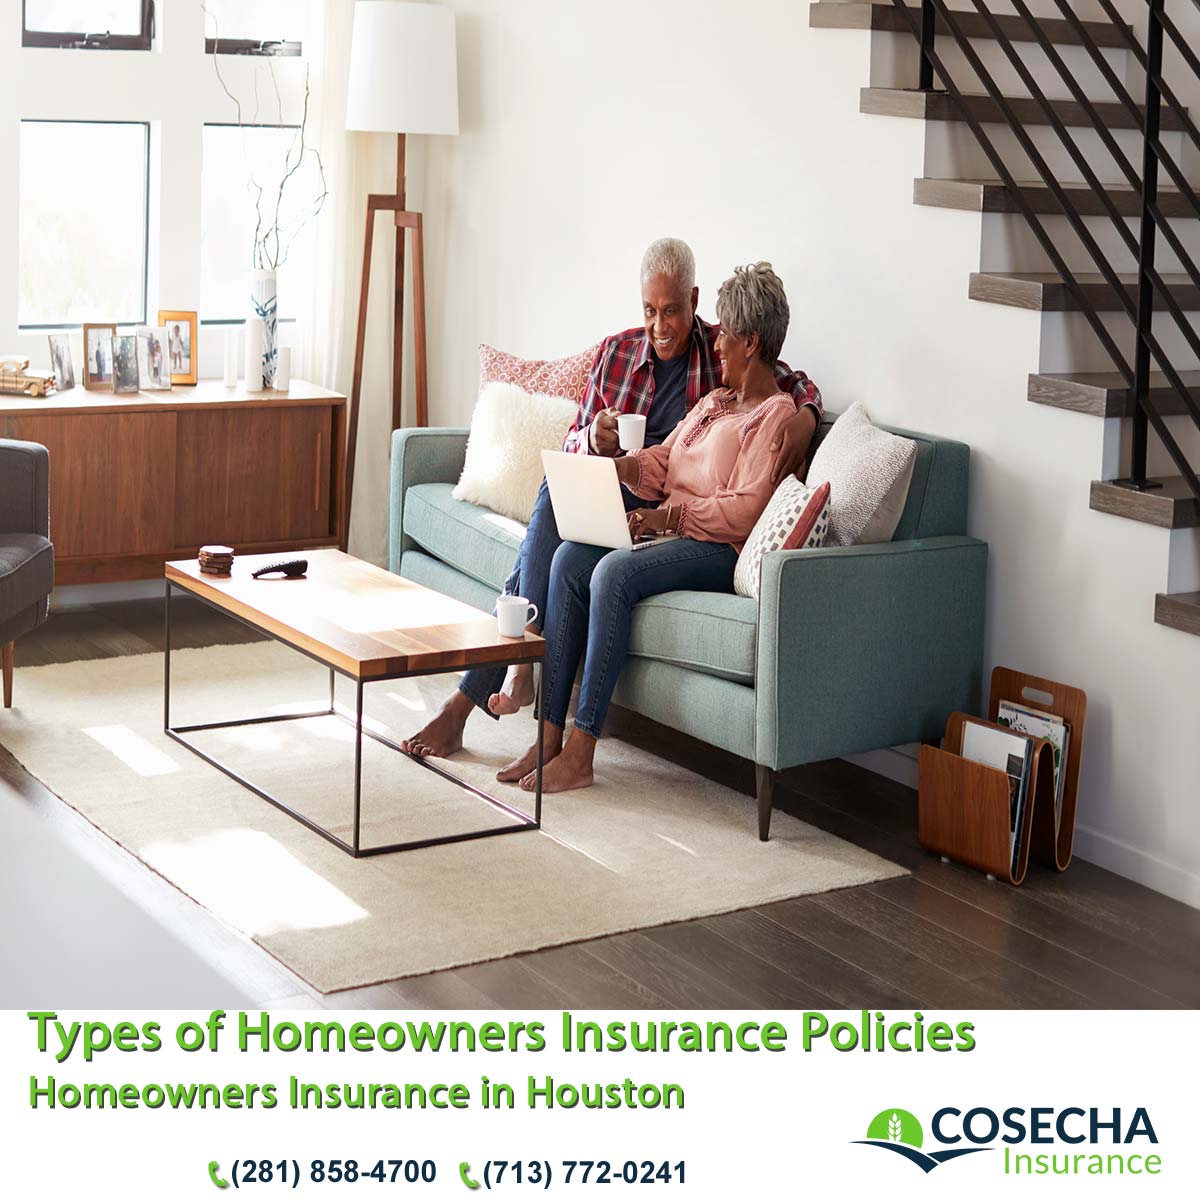 29 Homeowners Insurance in Houston